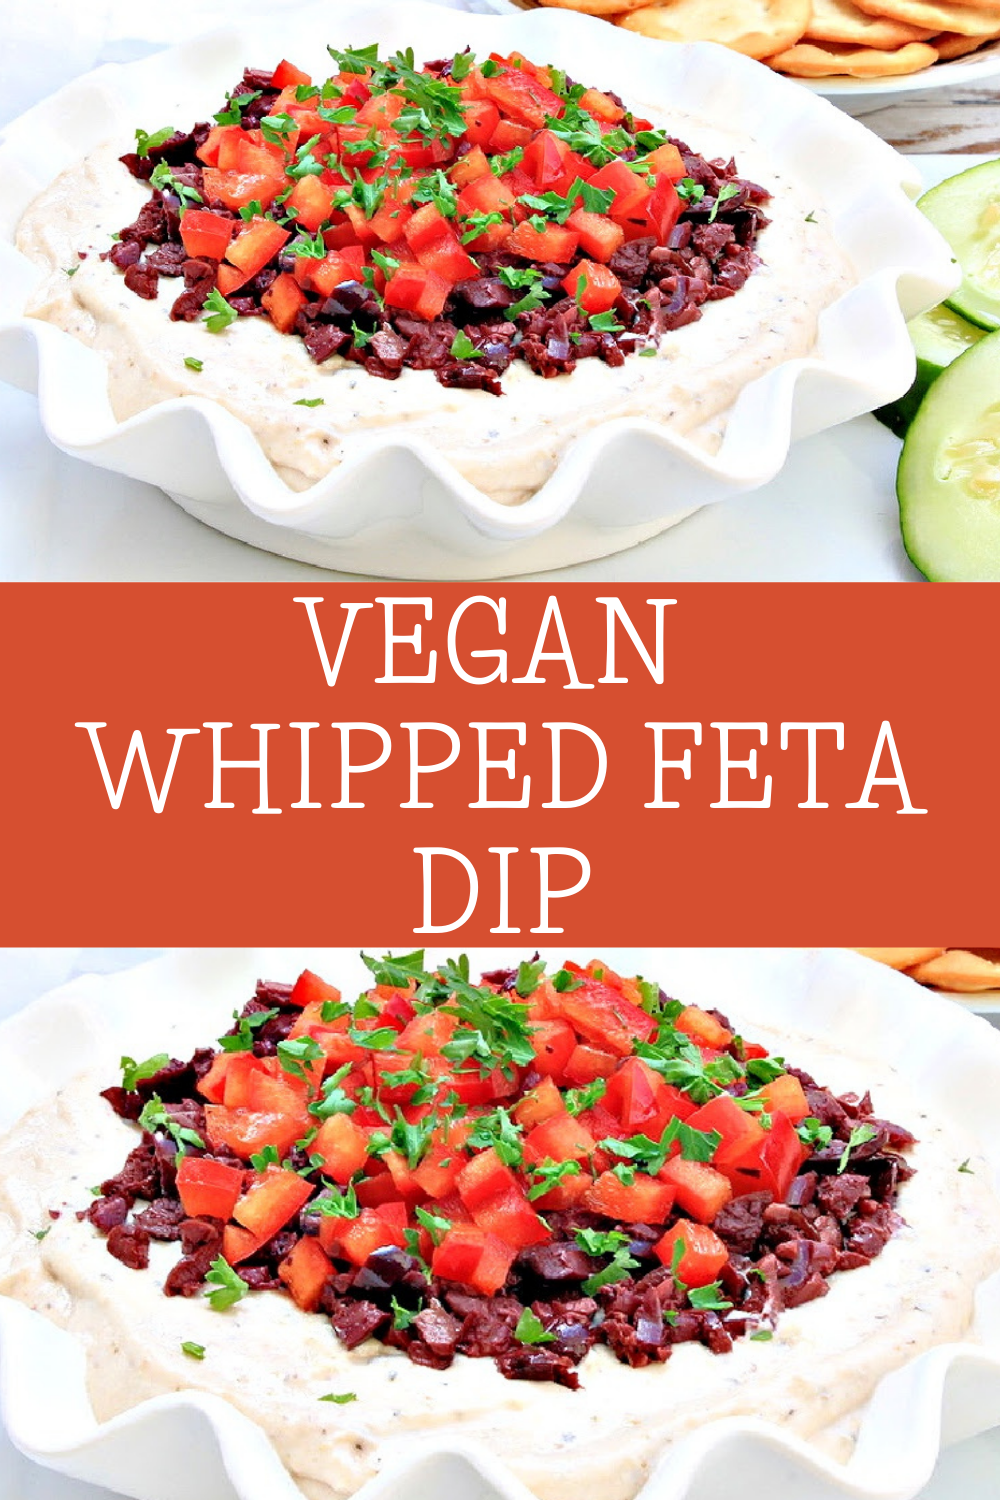 Vegan Whipped Feta Dip ~ Serve this quick and easy Mediterranean-style dip with fresh veggies and pita chips for a quick and easy appetizer your guests will love! via @thiswifecooks